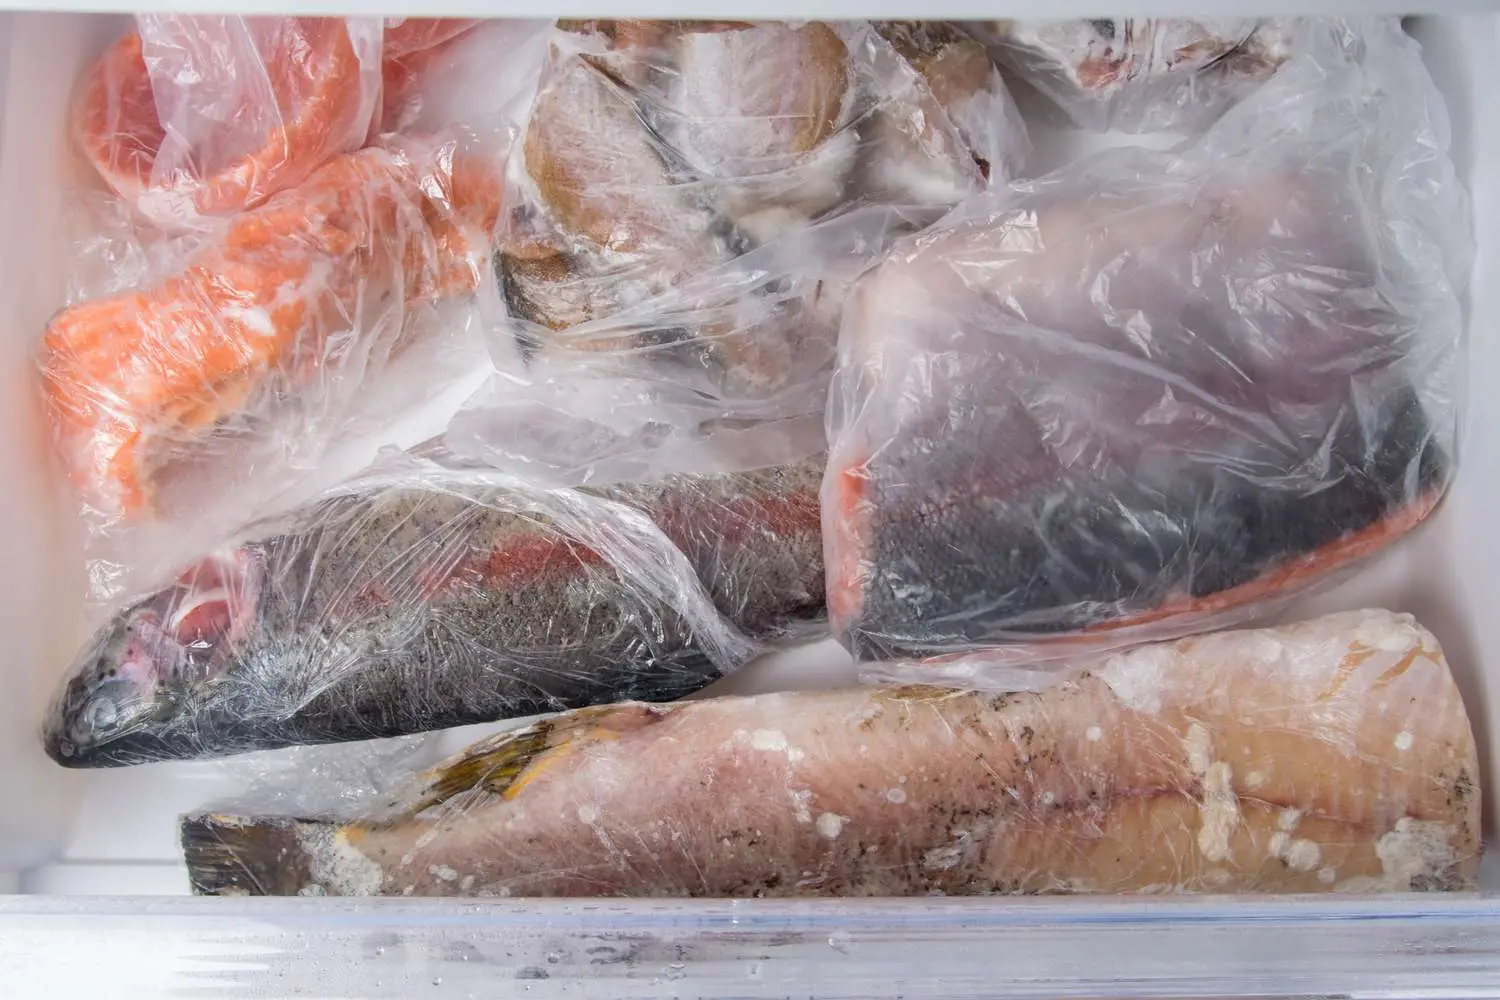 how long does smoked fish last vacuum sealed - Can you vacuum seal smoked fish